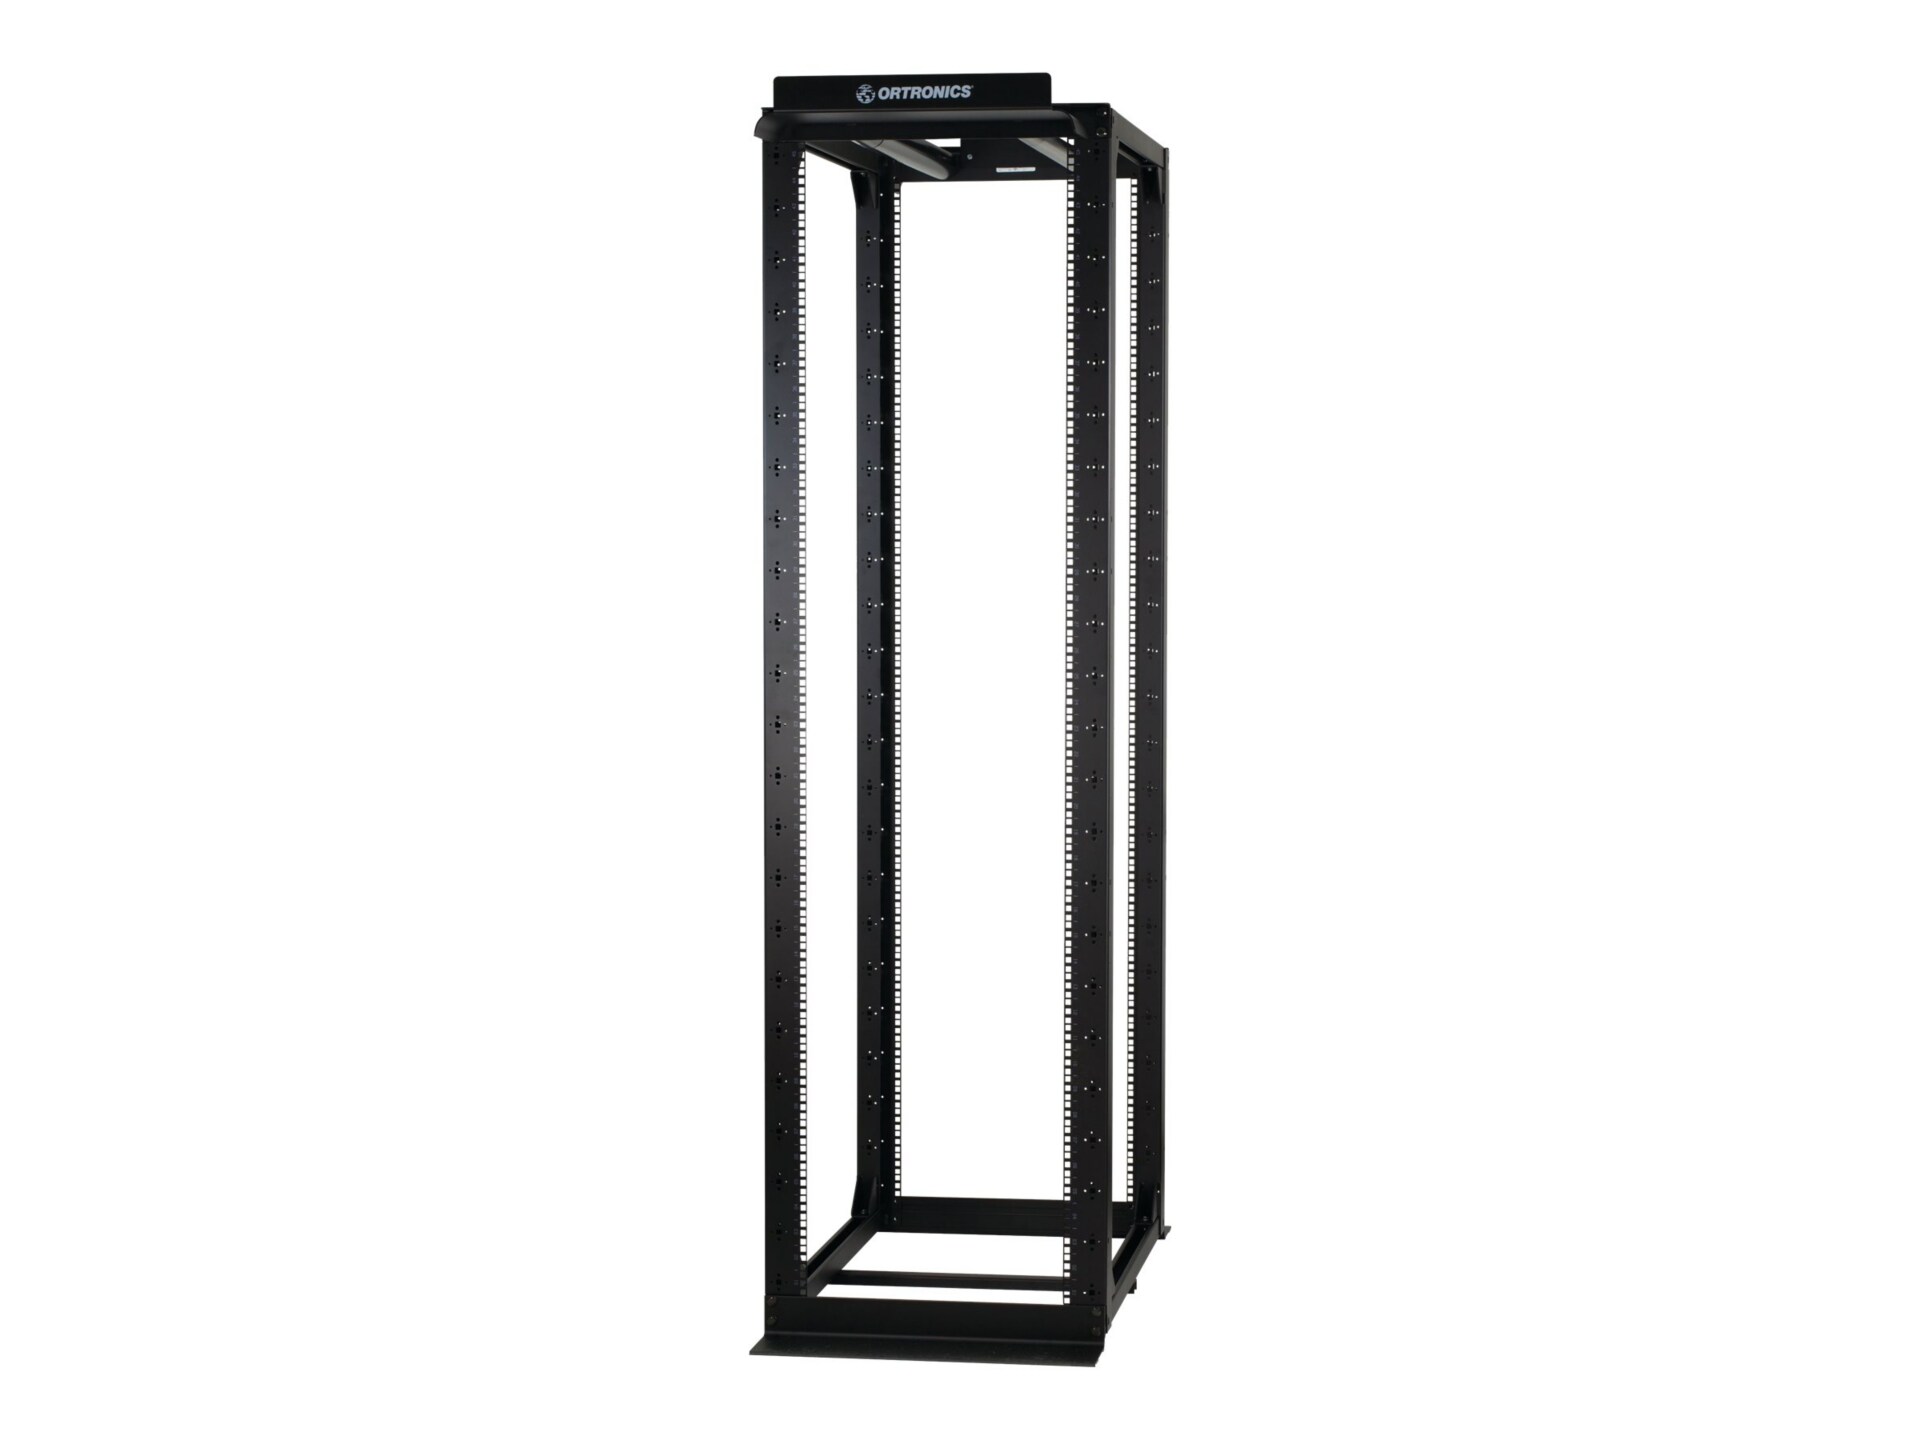 Ortronics Mighty Mo 20 - cable management rack - 51U